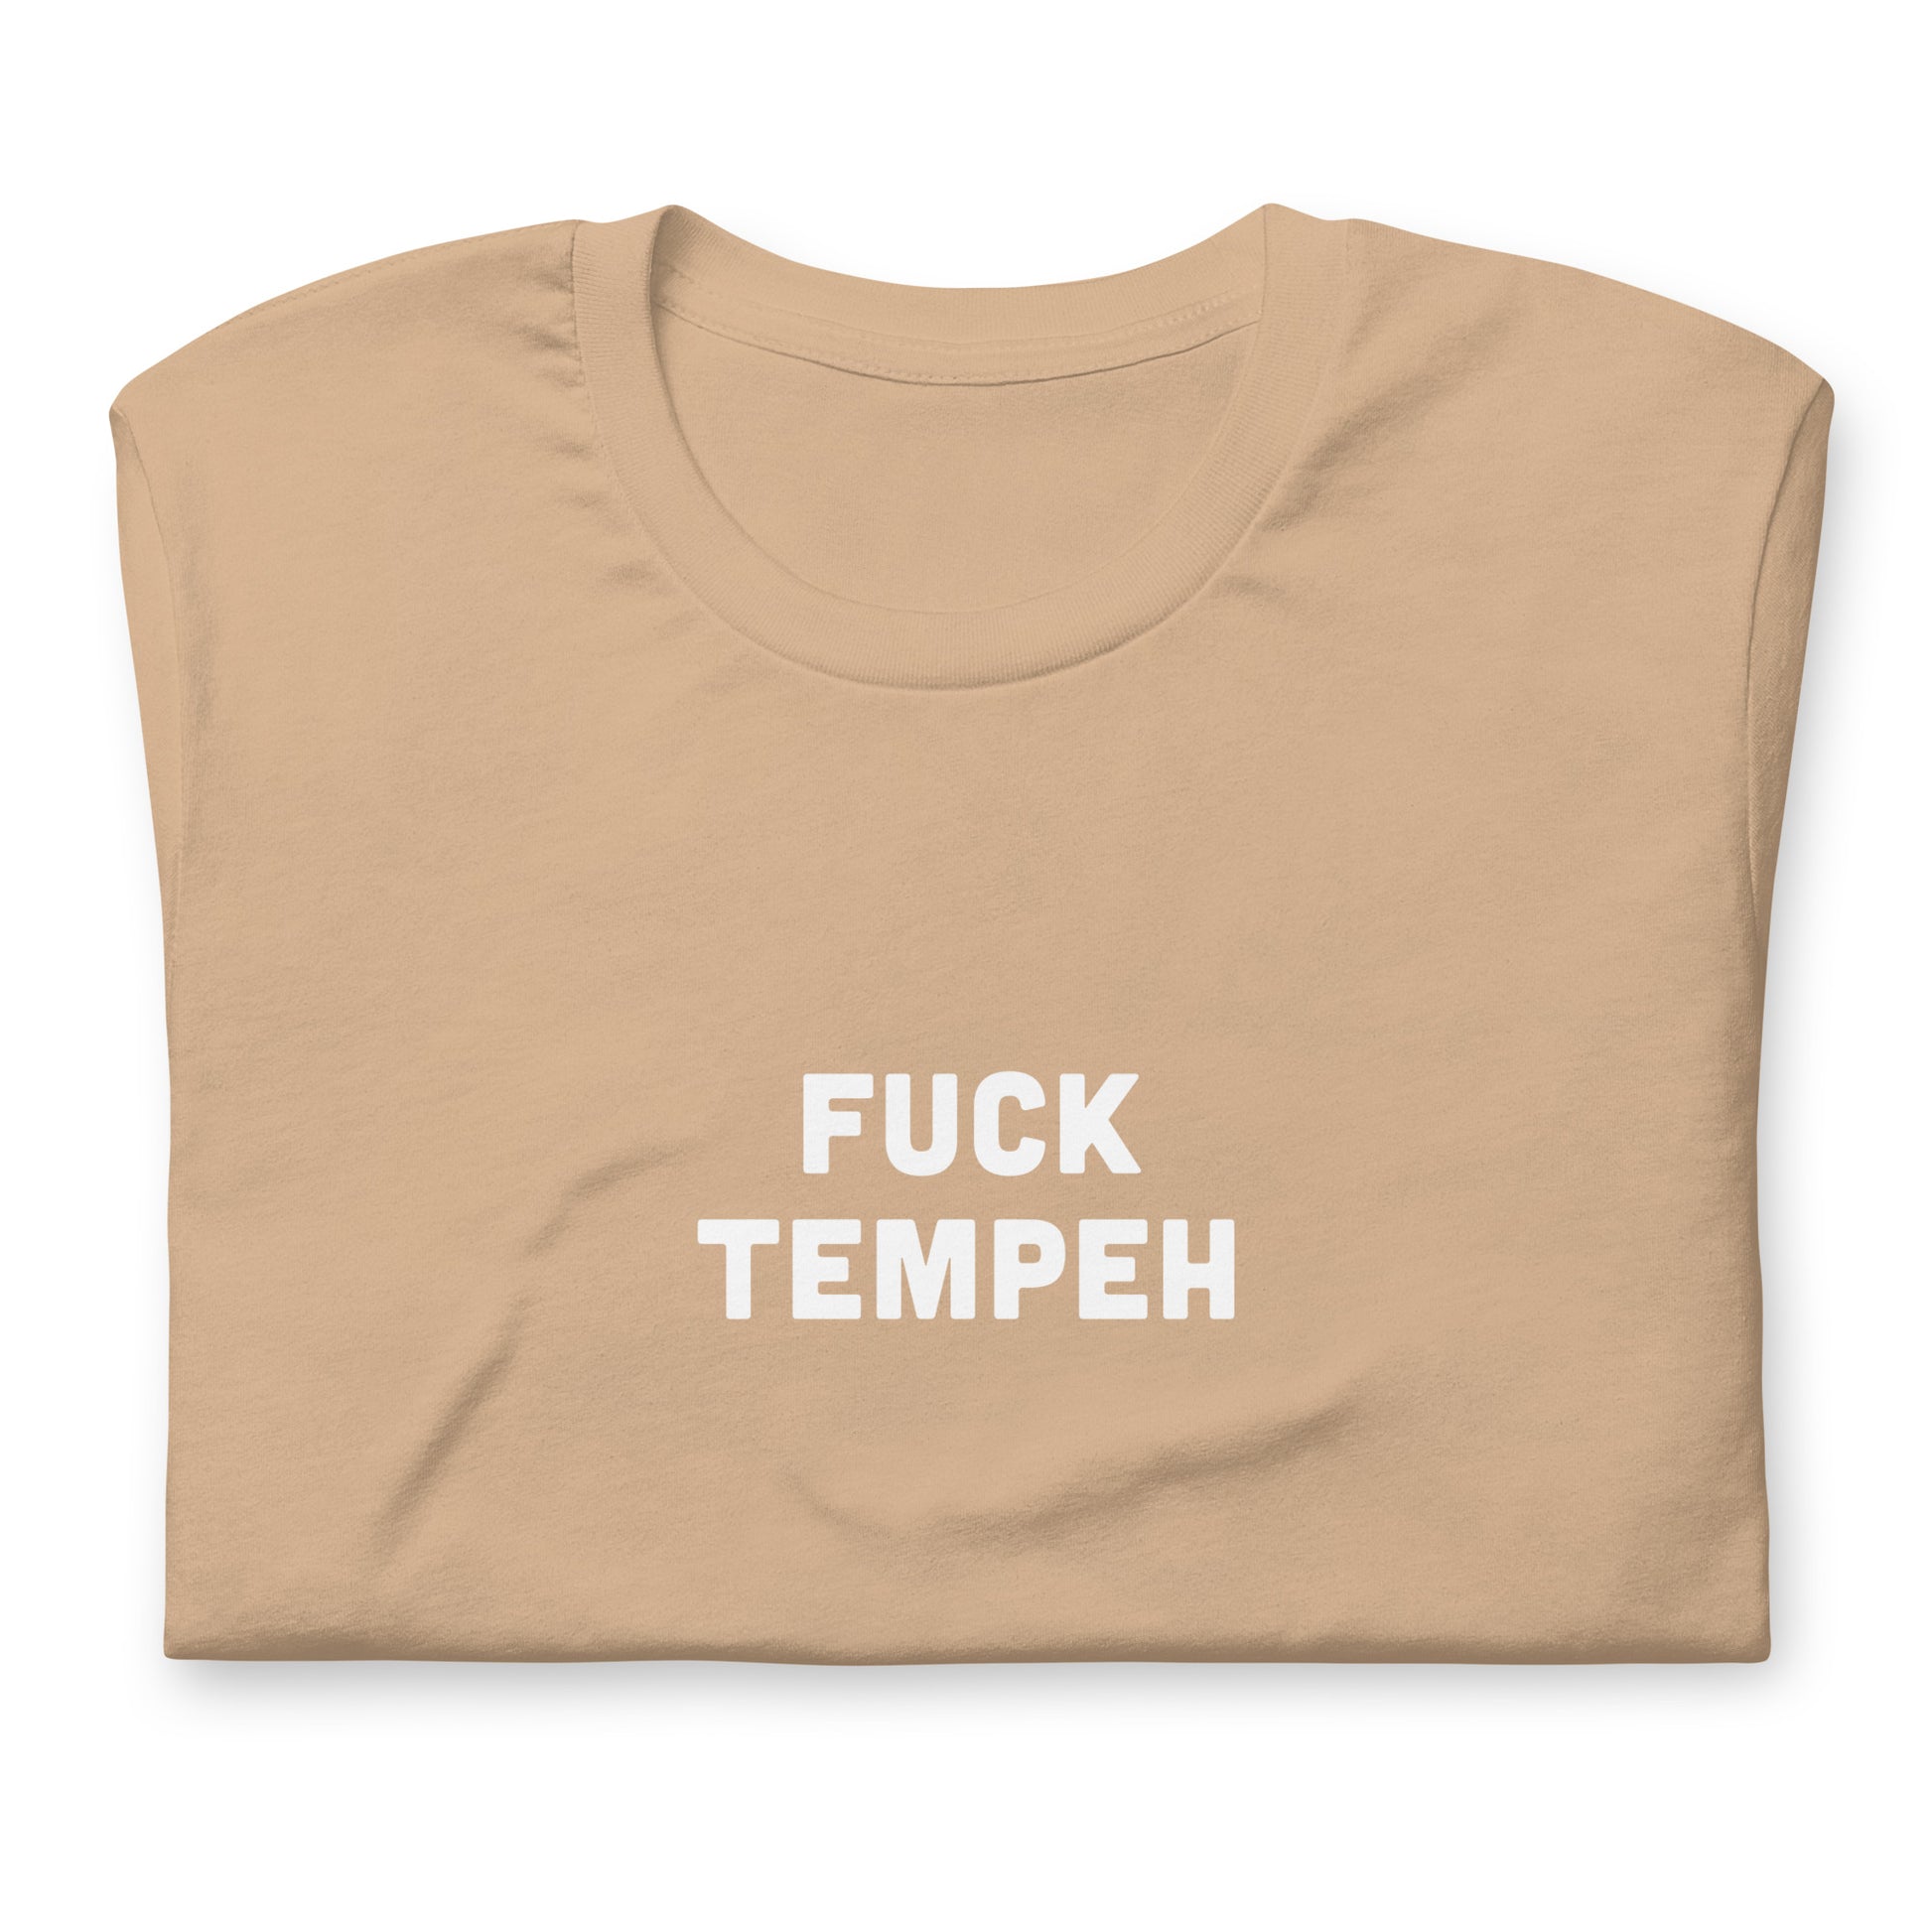 Fuck Tempeh T-Shirt Size XL Color Forest